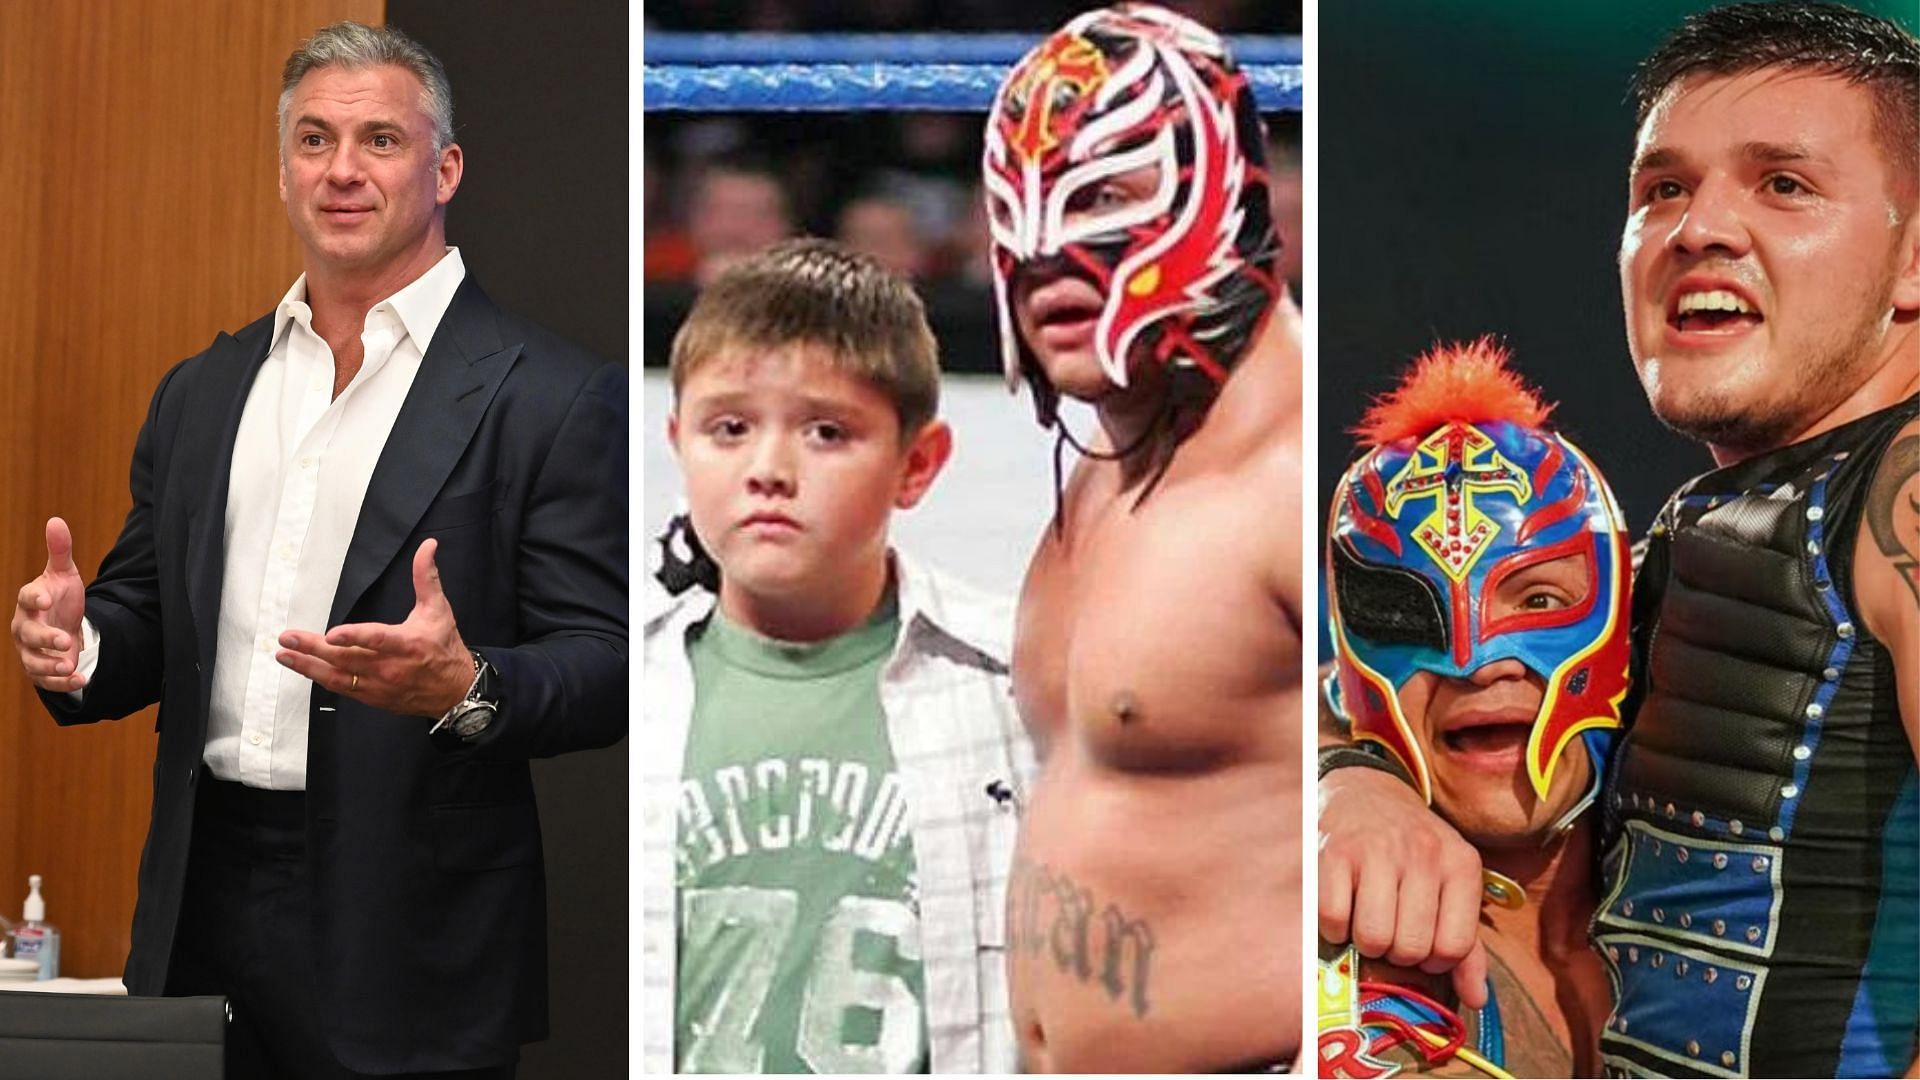 Shane McMahon and Dominik Mysterio both had issues with their fathers